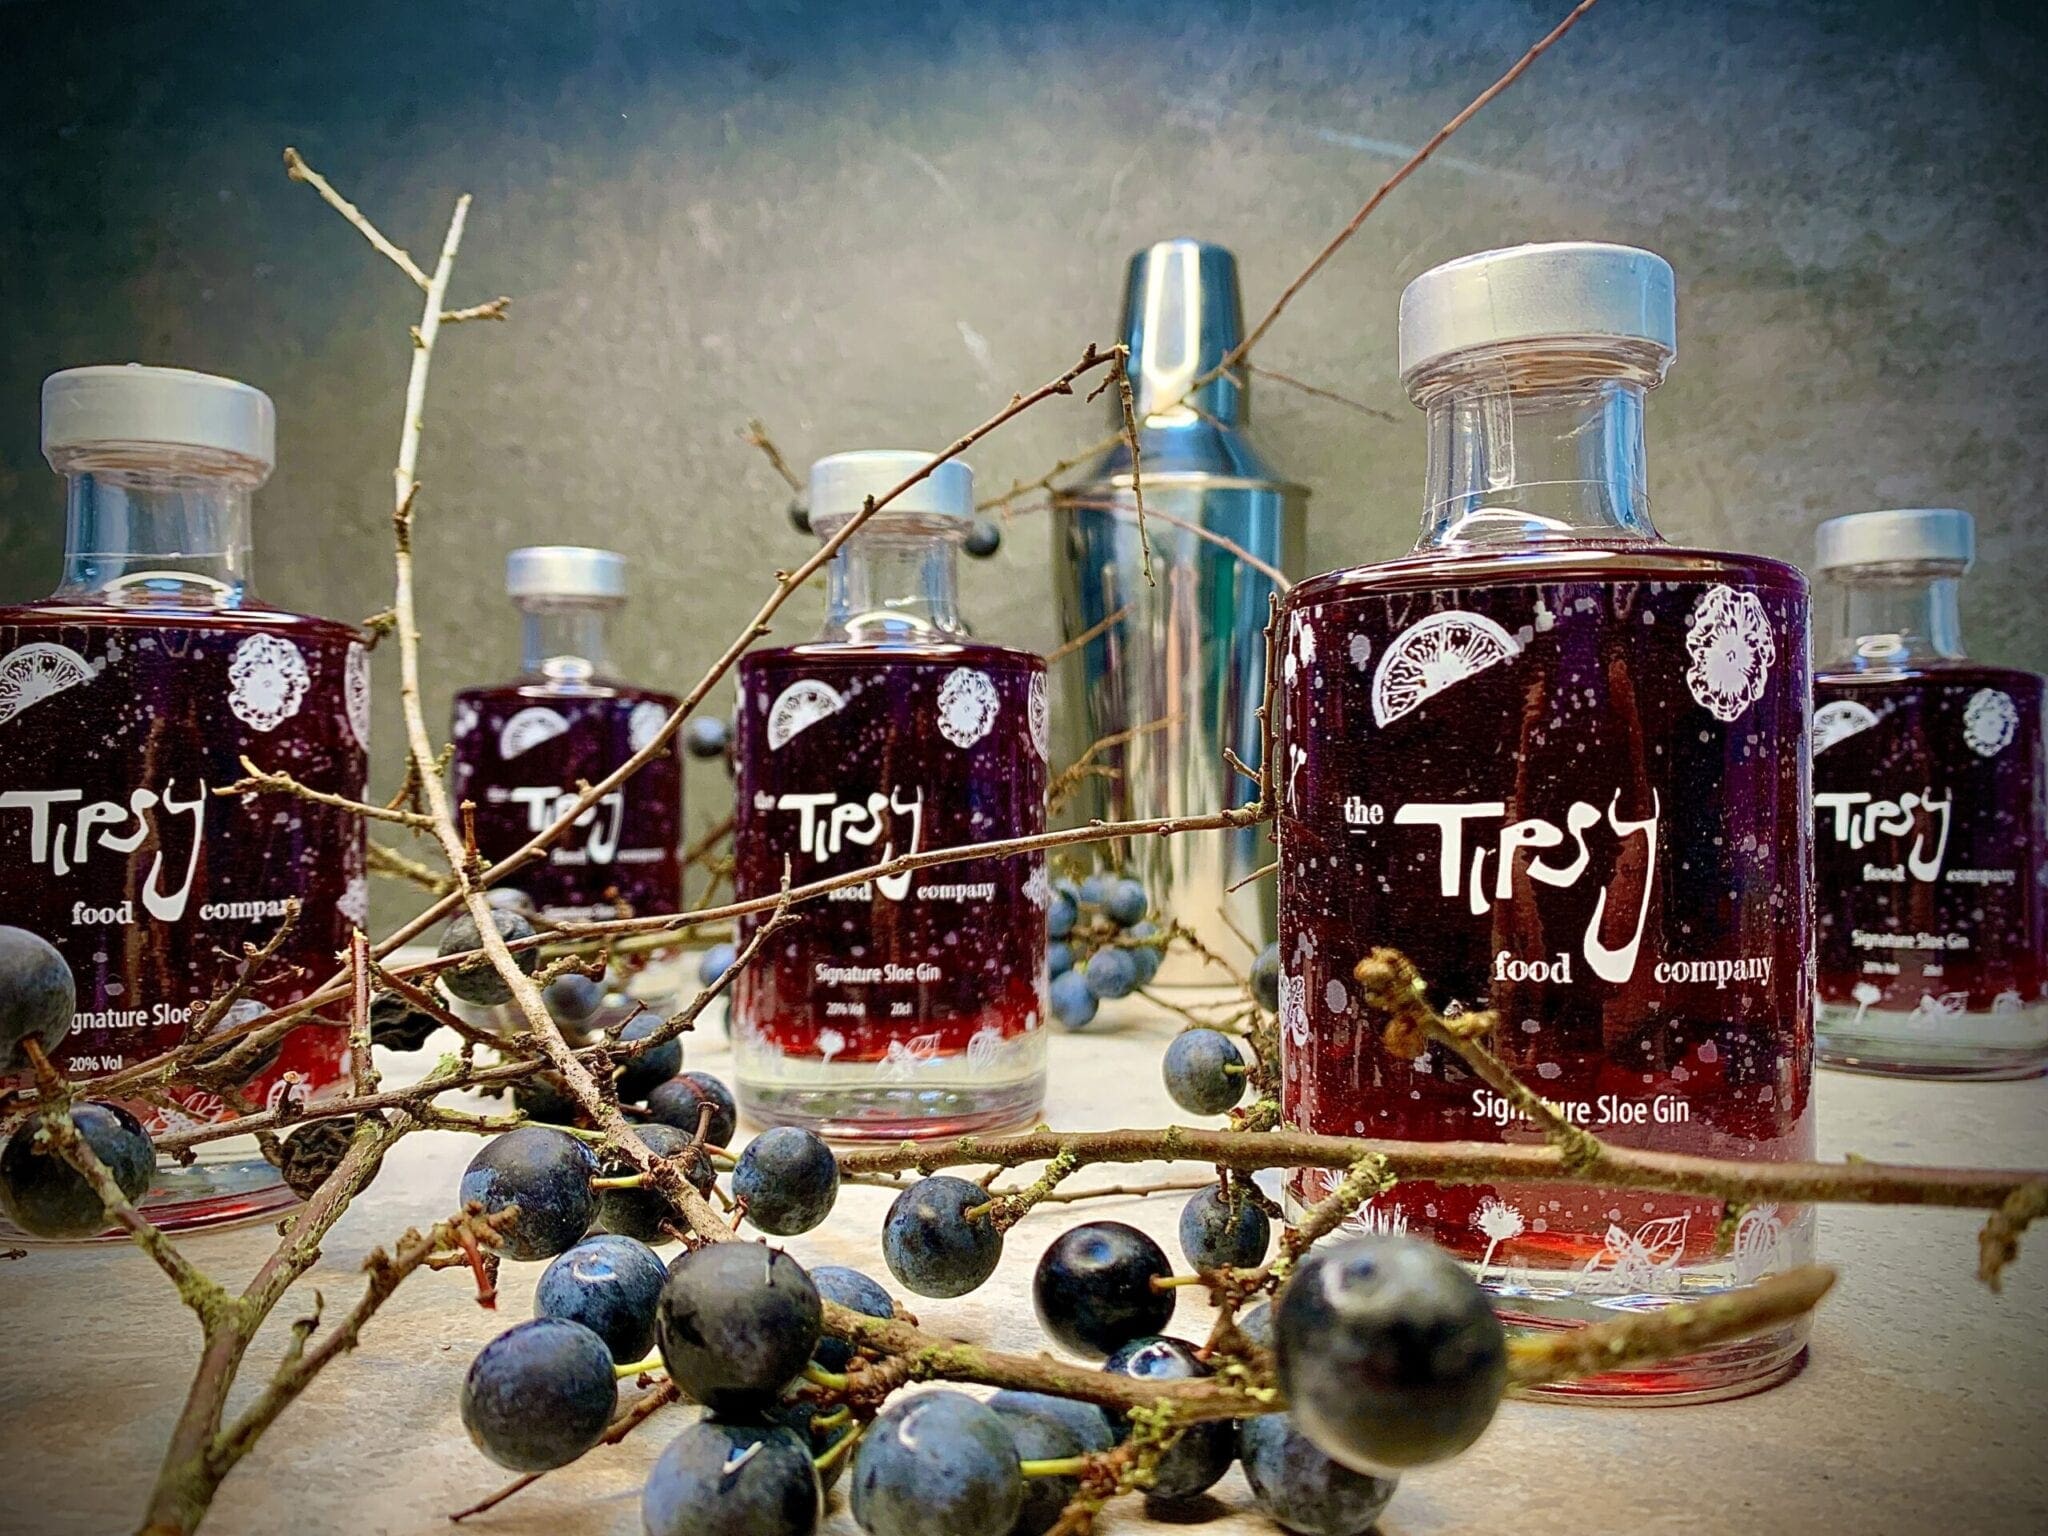 A group of bottles with grapes and berries on a table.